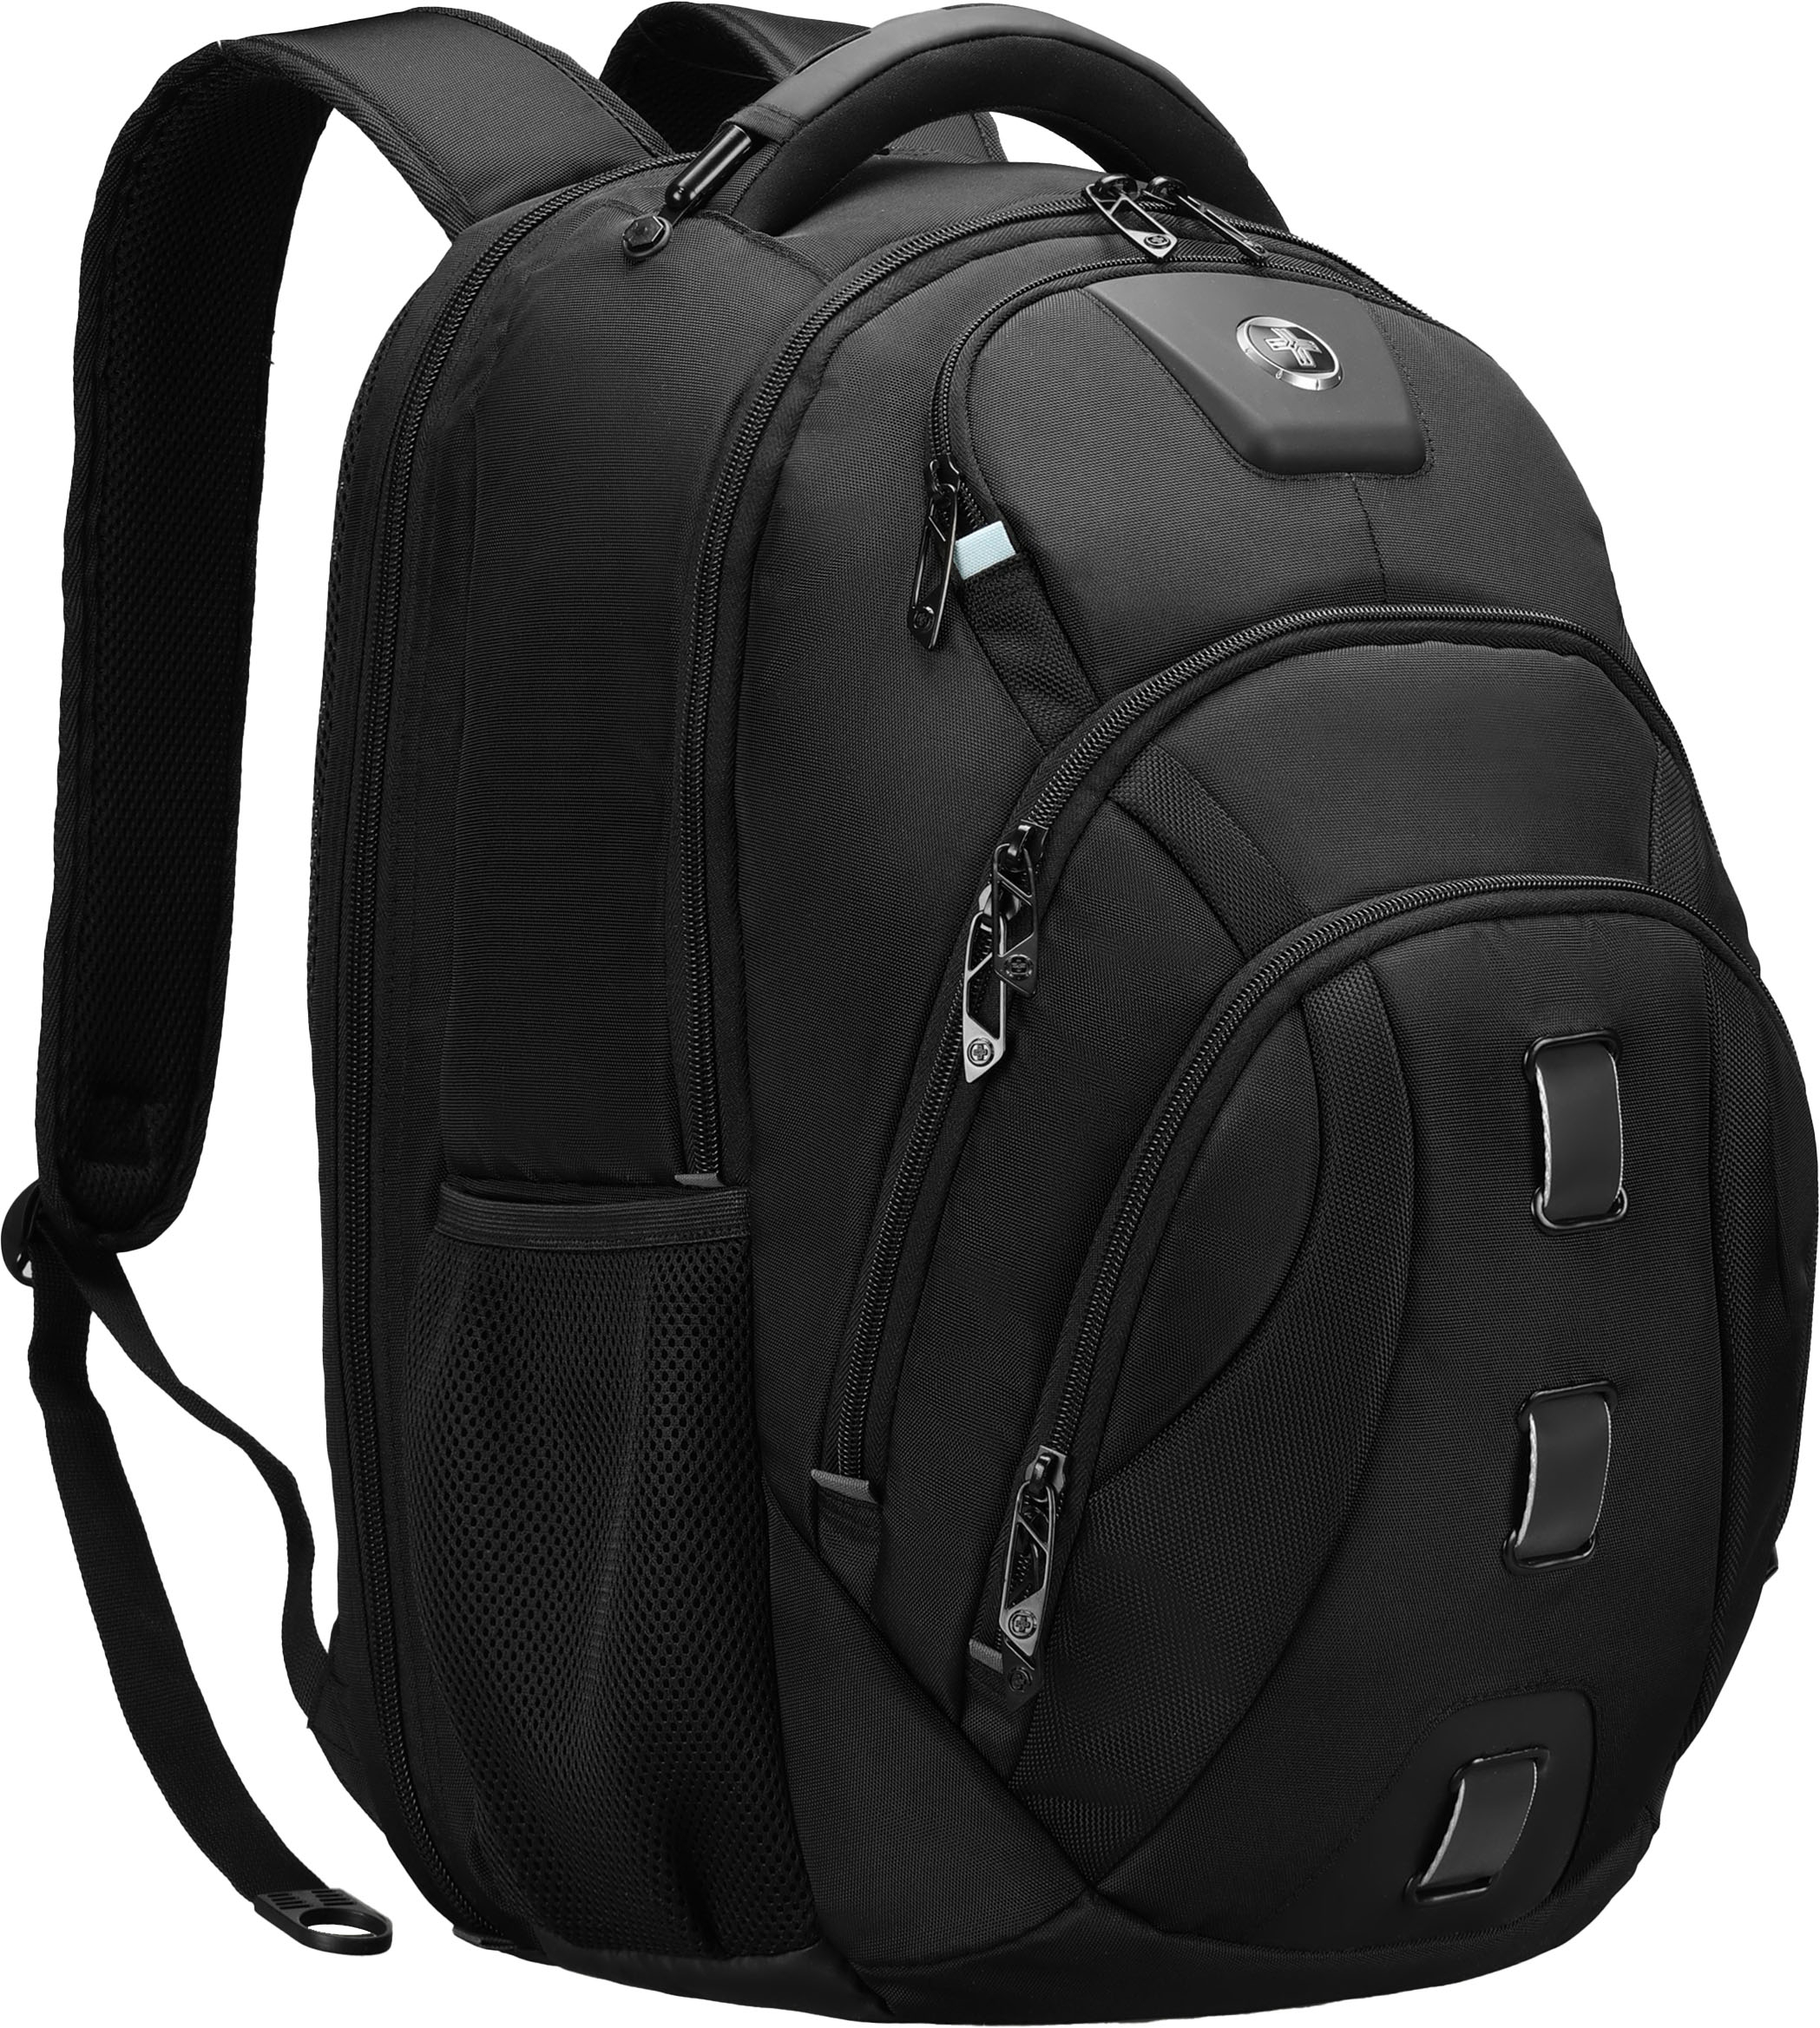 Swissdigital Design Pixel Pro Notebook Backpack with Integrated USB ...